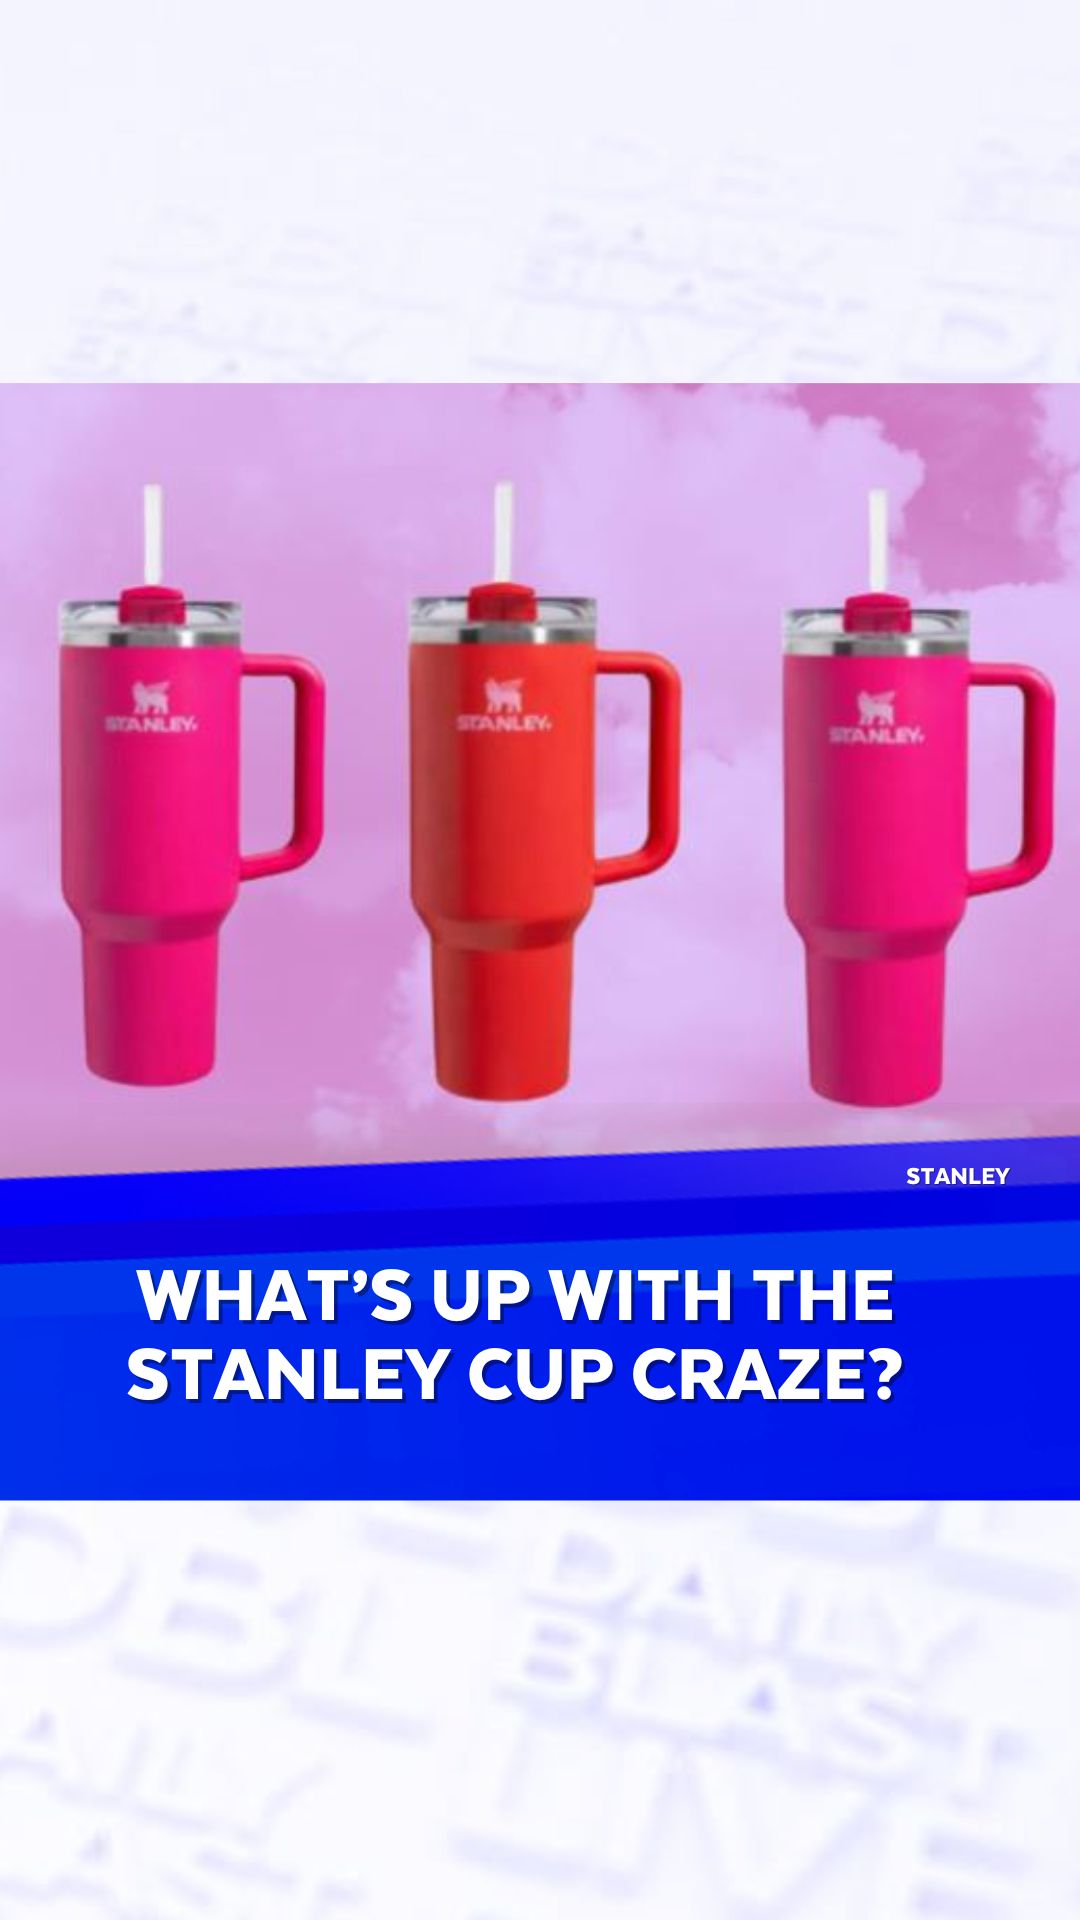 What Is the Stanley Cup Craze?